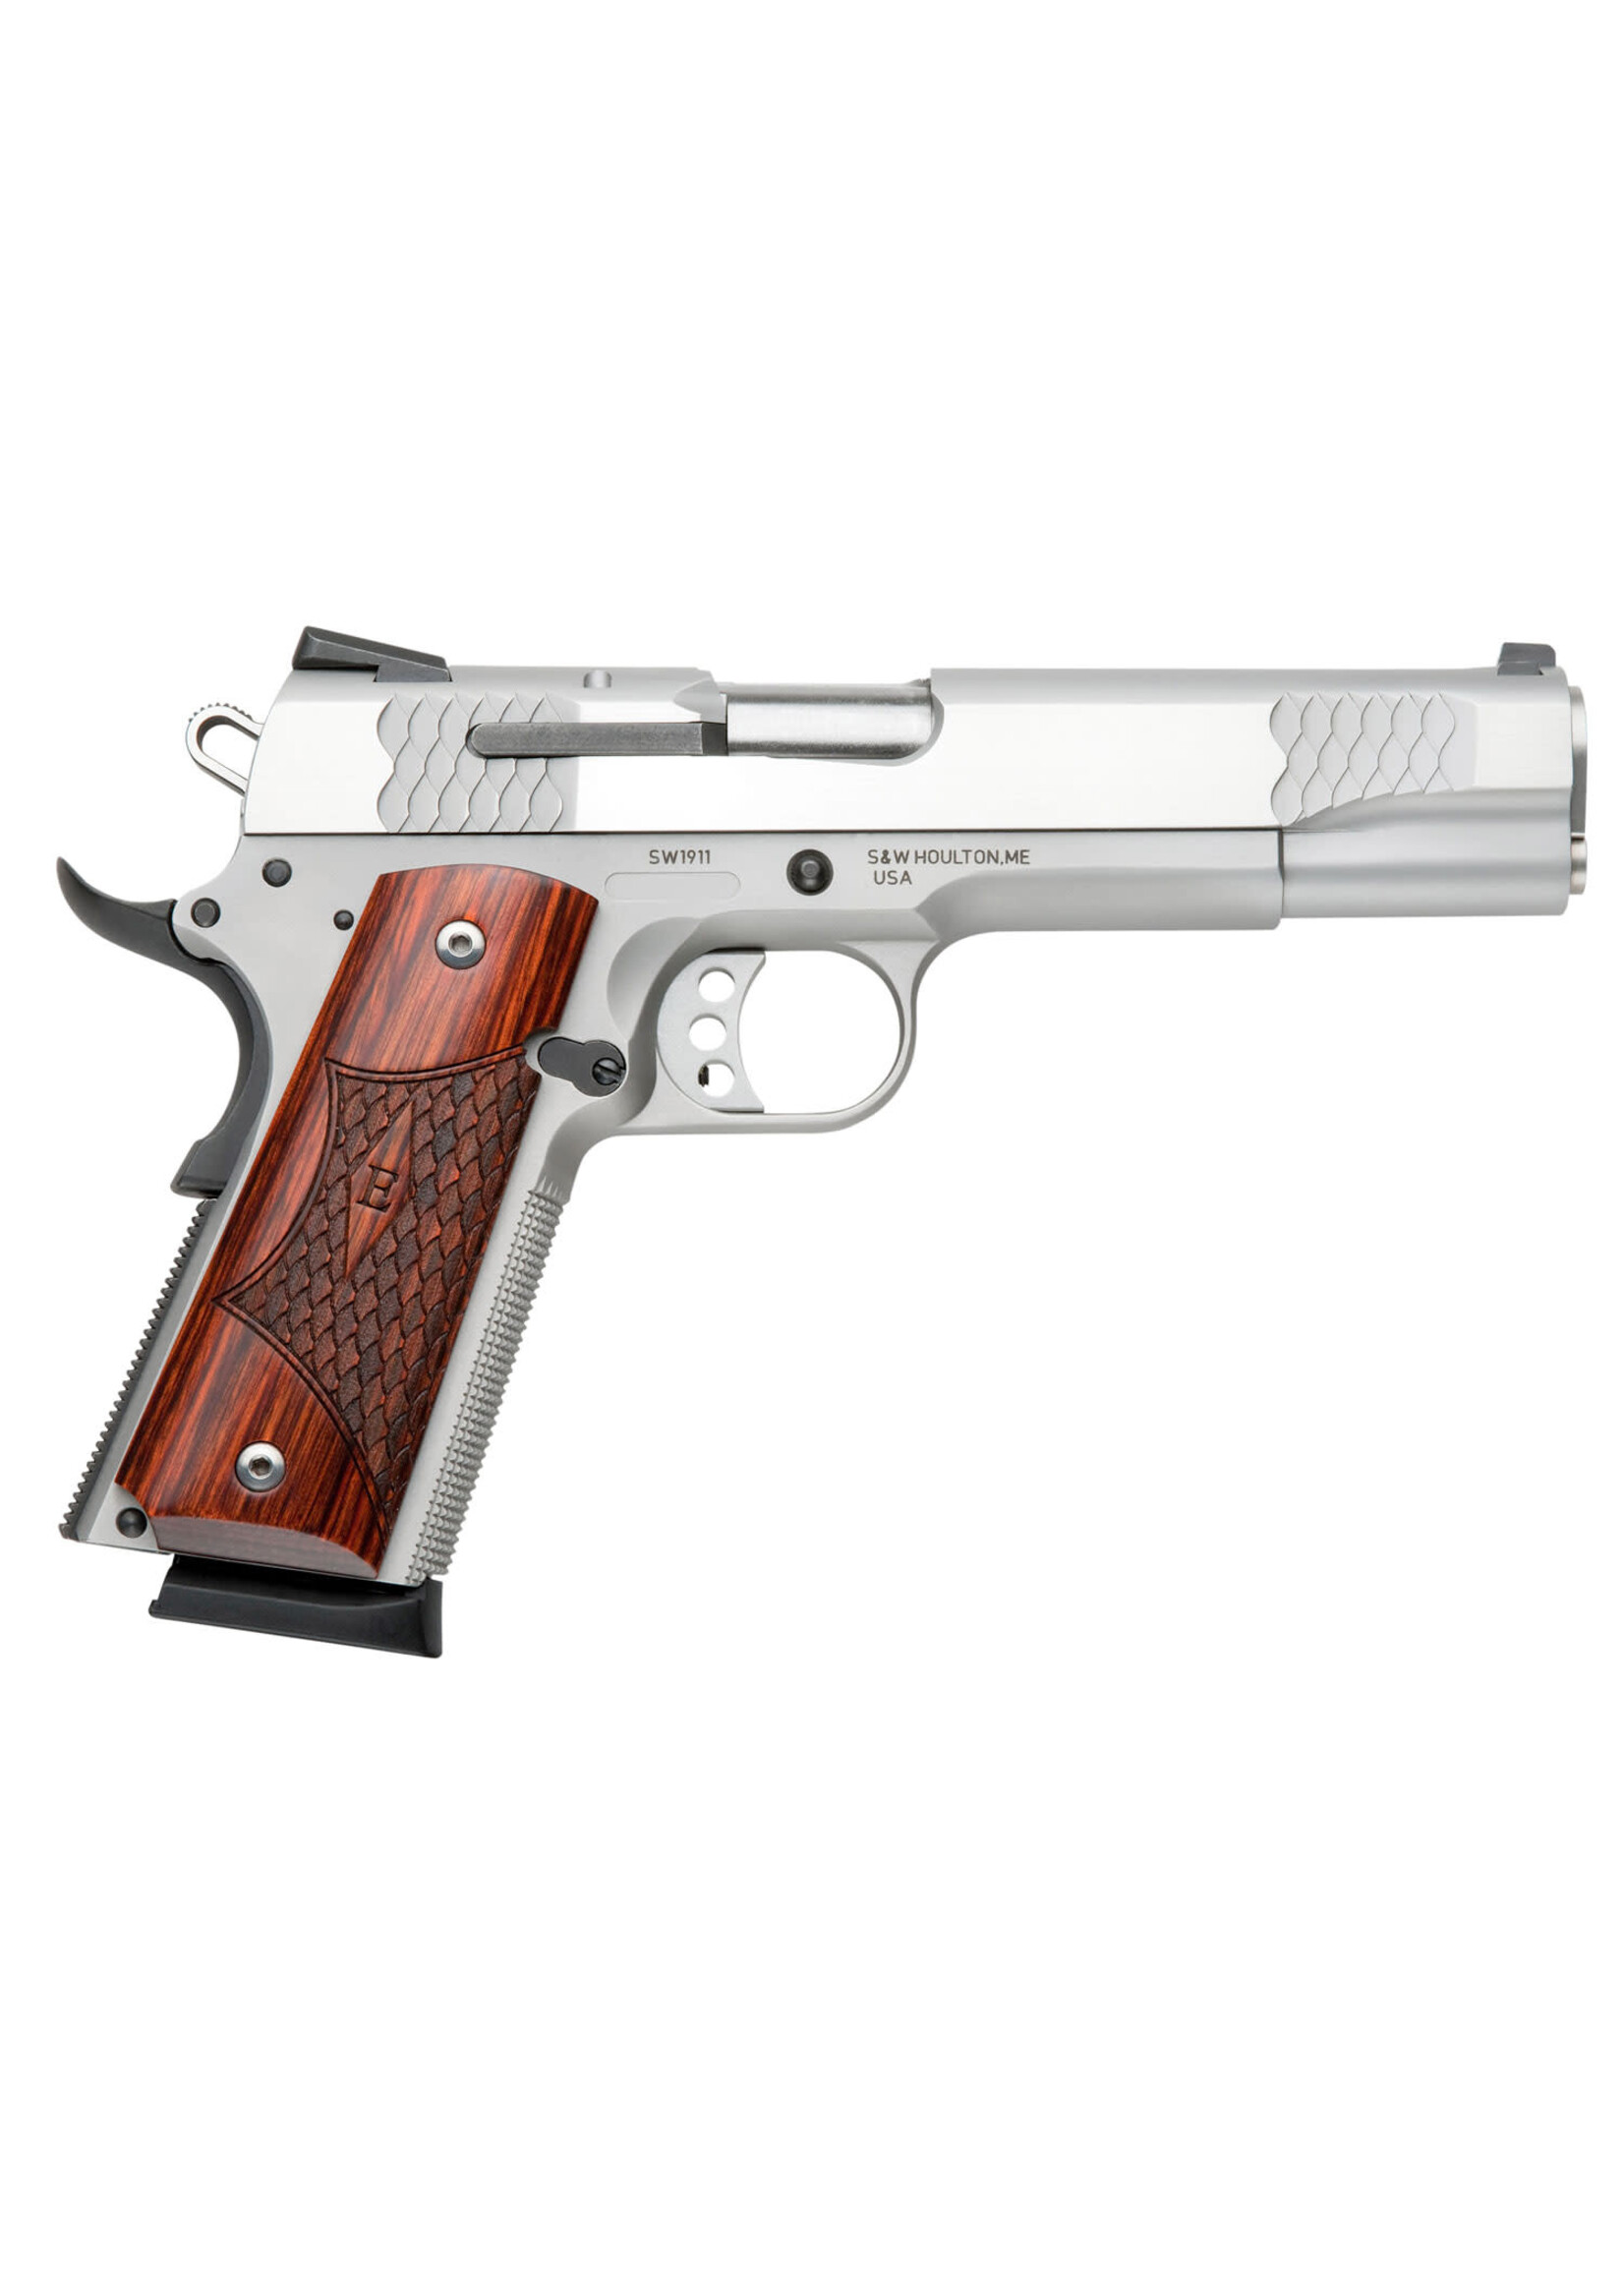 Smith and Wesson (S&W) Smith & Wesson 108482 1911 E-Series 45 ACP 5" Barrel 8+1, Satin Stainless Steel Frame & Slide, Laminate Wood E Series Grip, Manual Grip & Thumb Safety